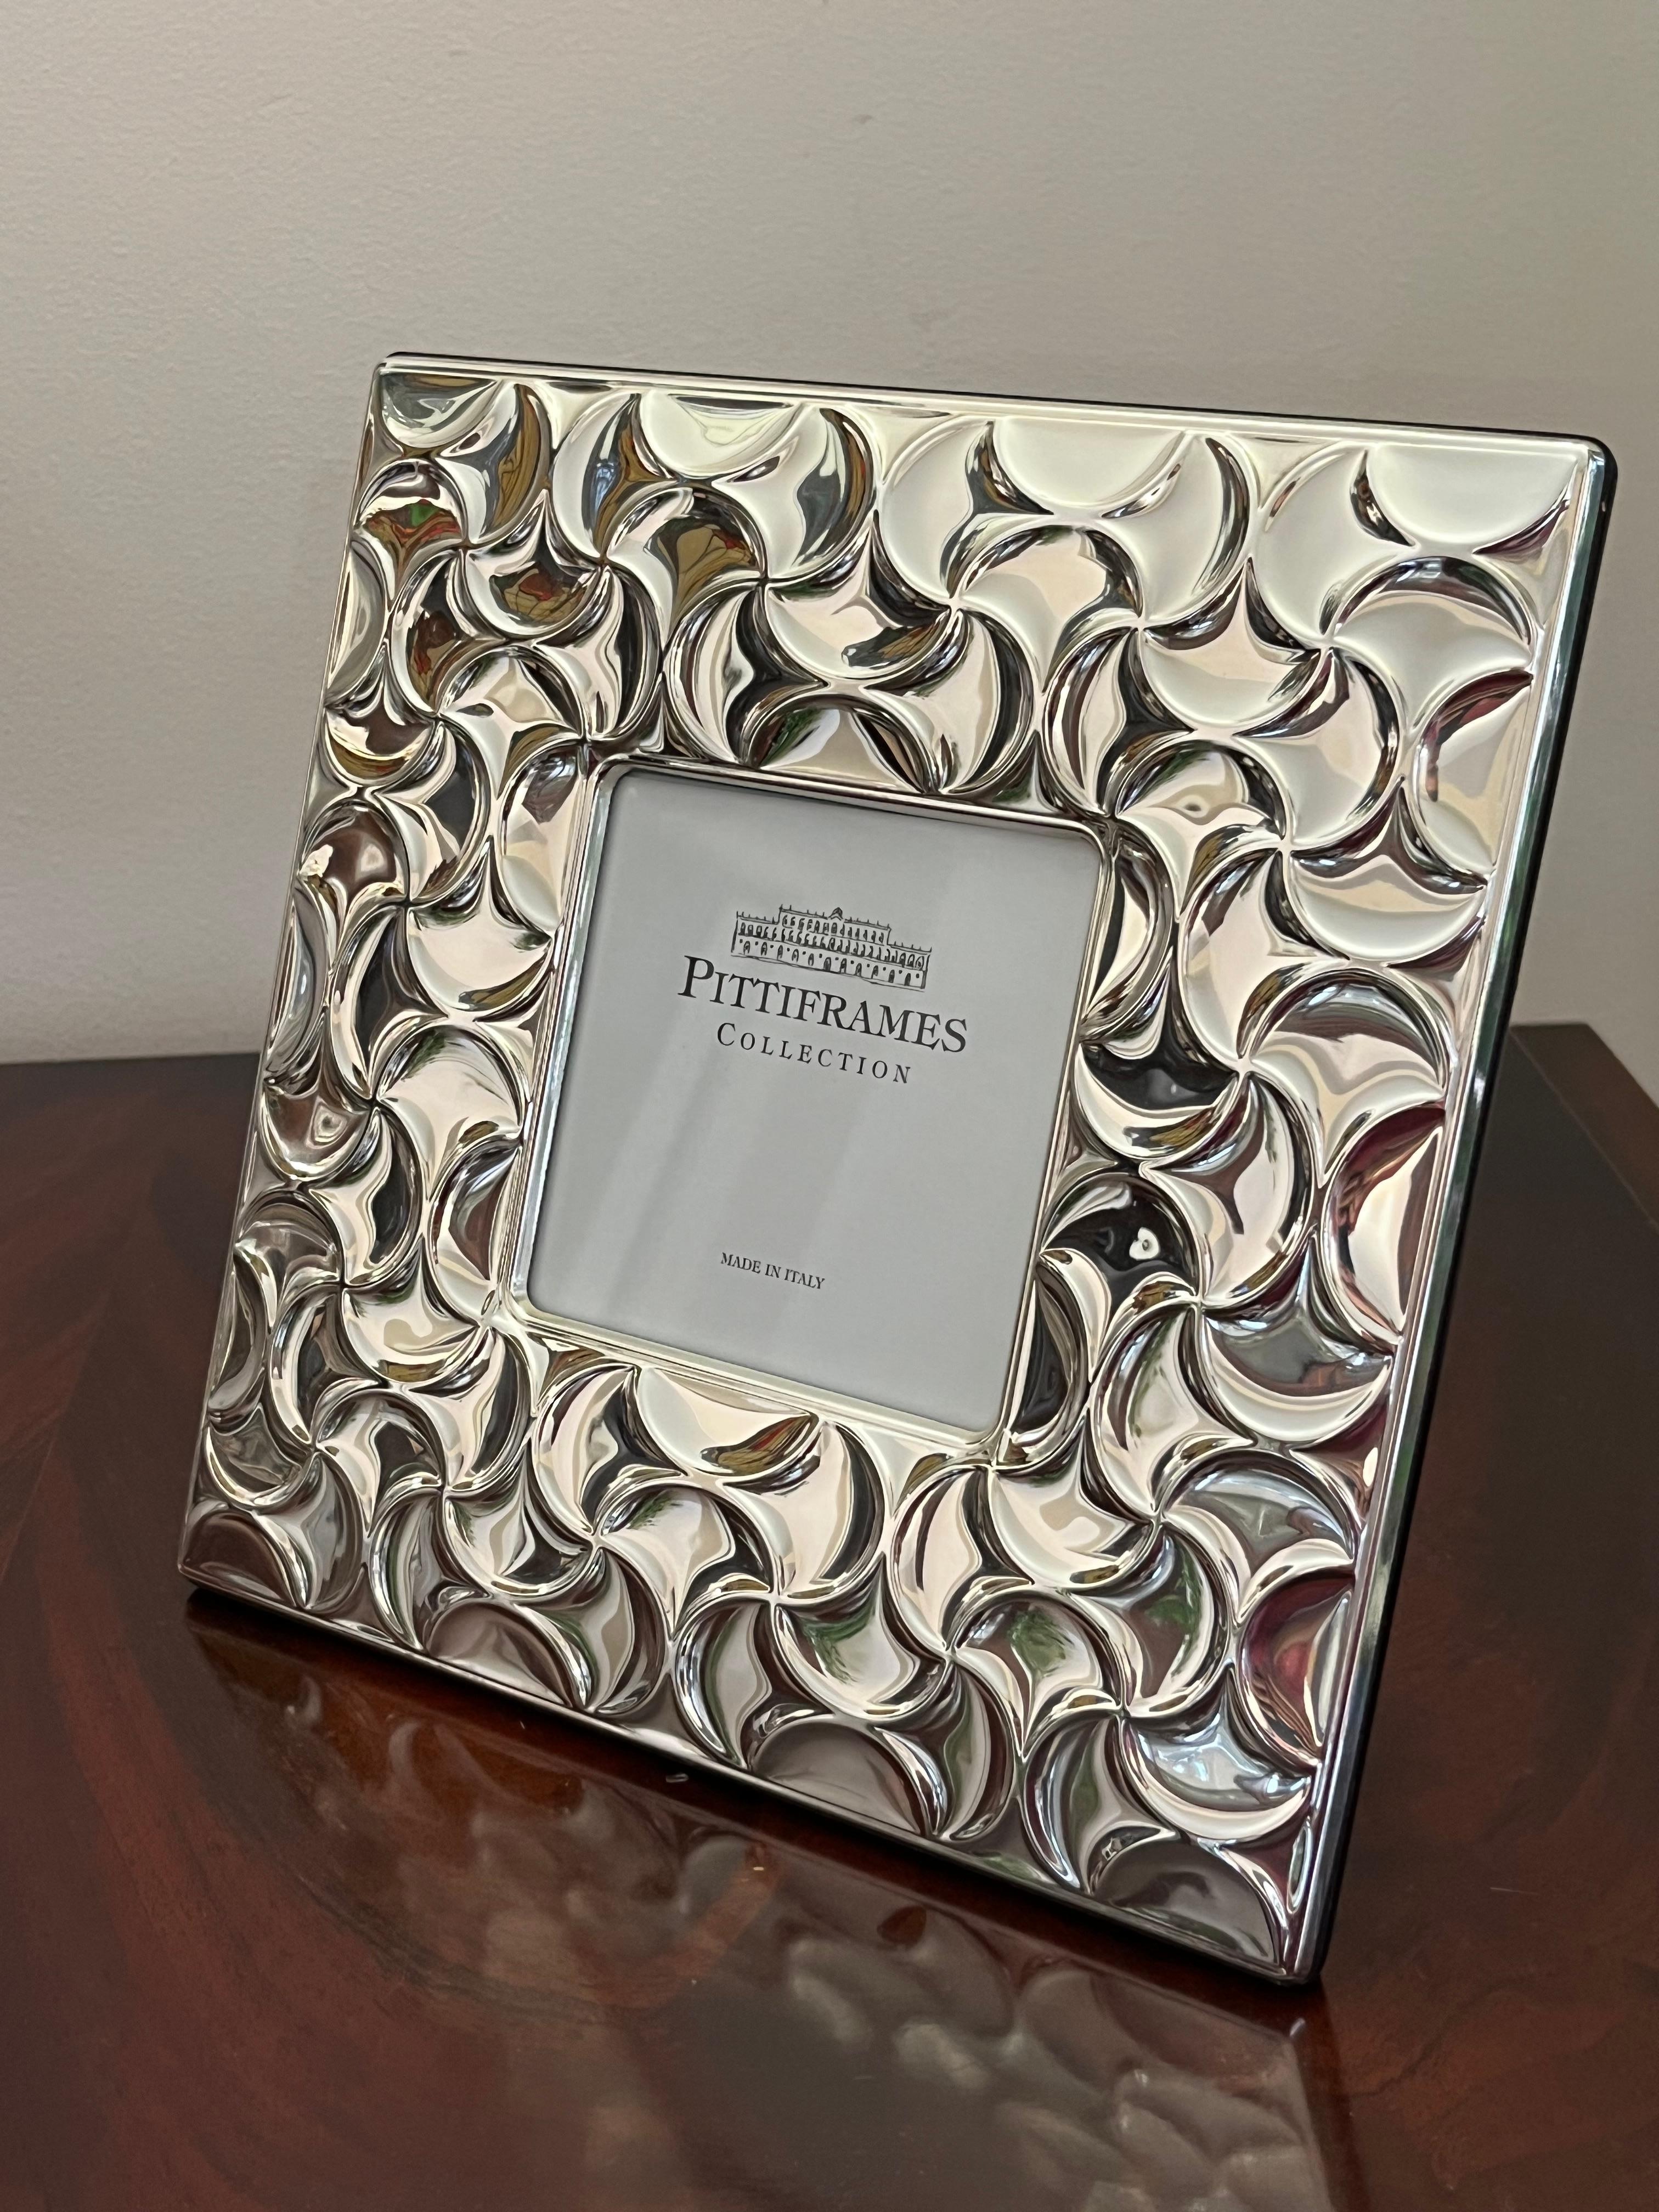 Silver photo frame, Italy, 1980s
It belonged to my grandparents and is in excellent condition. Small signs of the time. External measures 22 cm high by 22 cm wide. It can house a photograph measuring 9 cm by 9 cm.